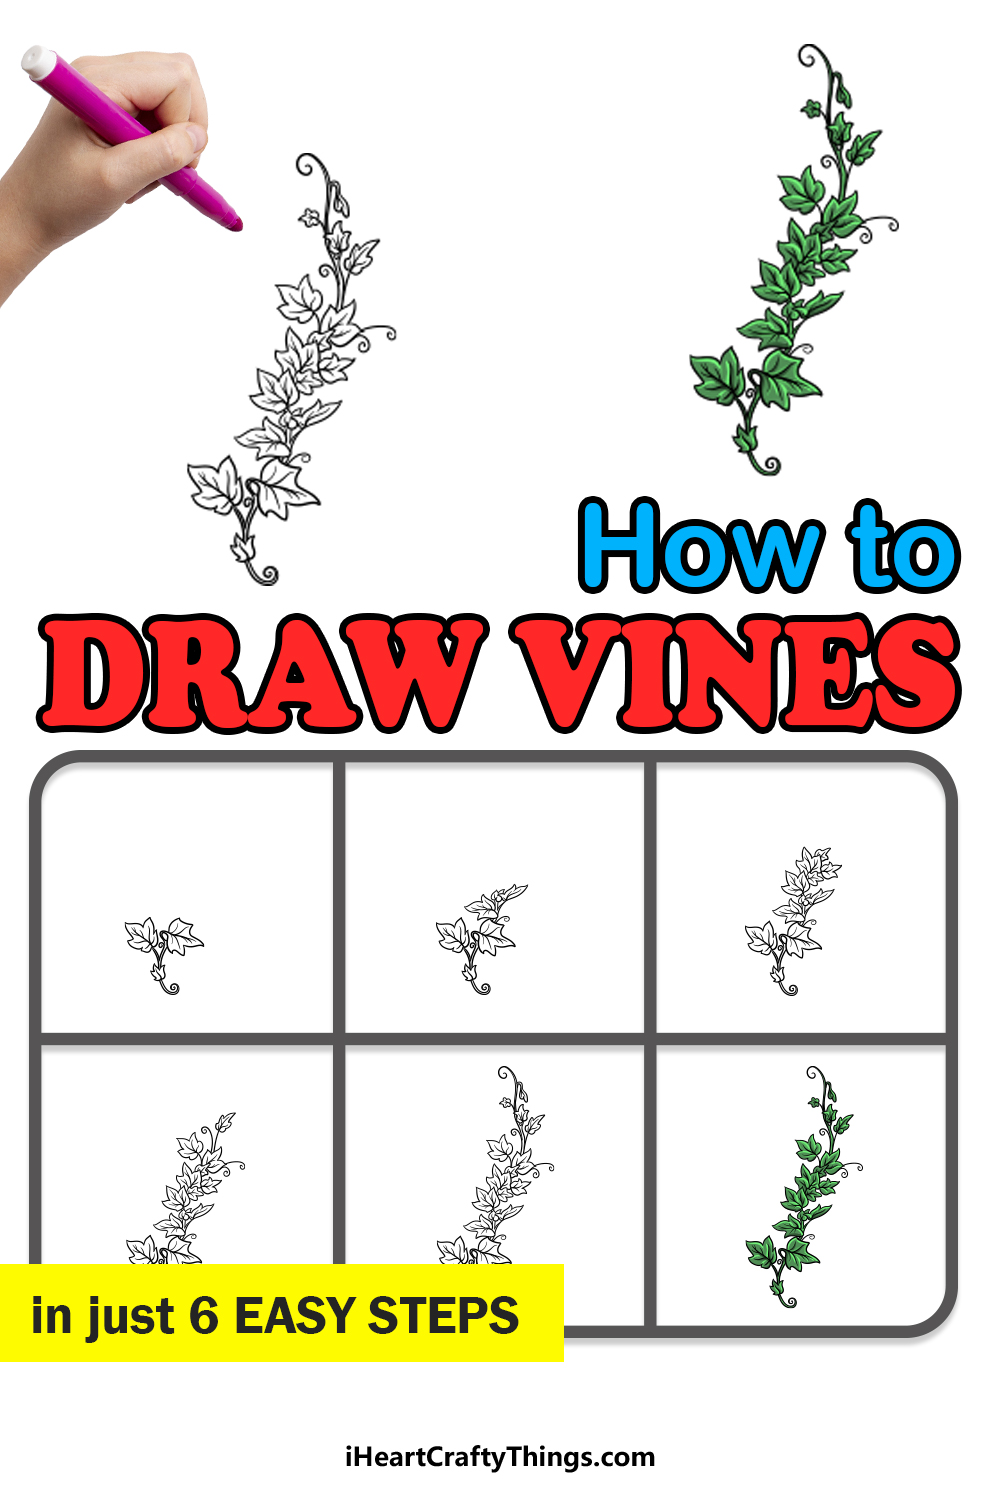 how to draw vines in 6 easy steps